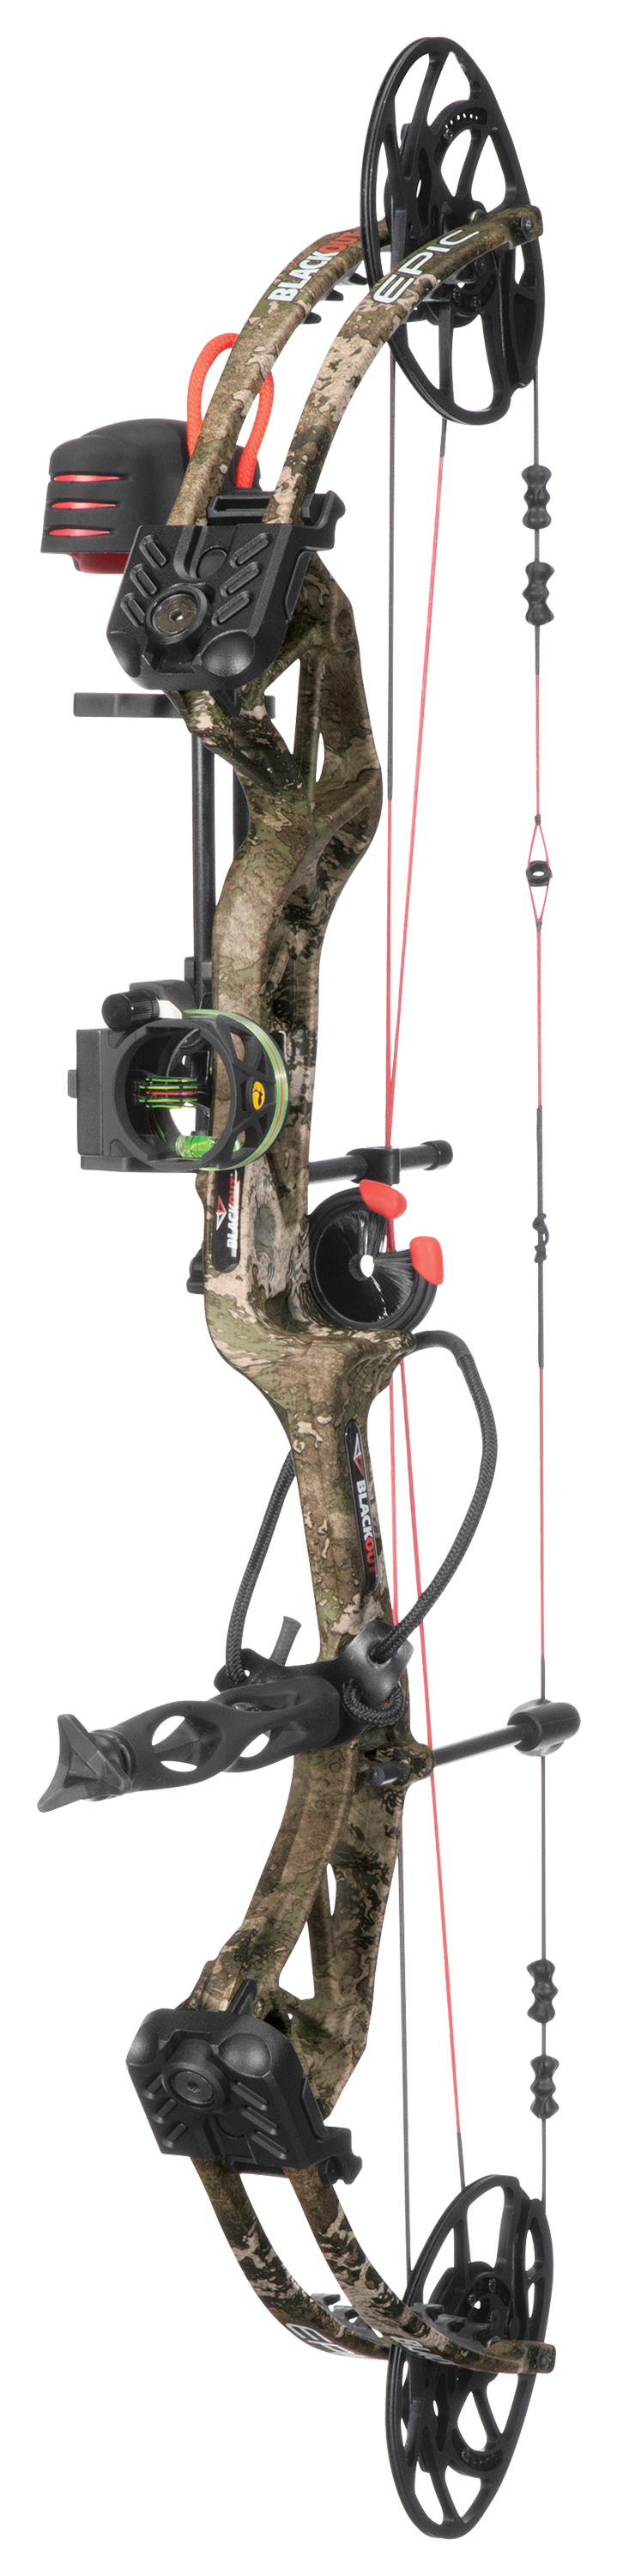 BlackOut Epic Compound Bow Package - 55-70 lbs. - Left Hand - TrueTimber Strata